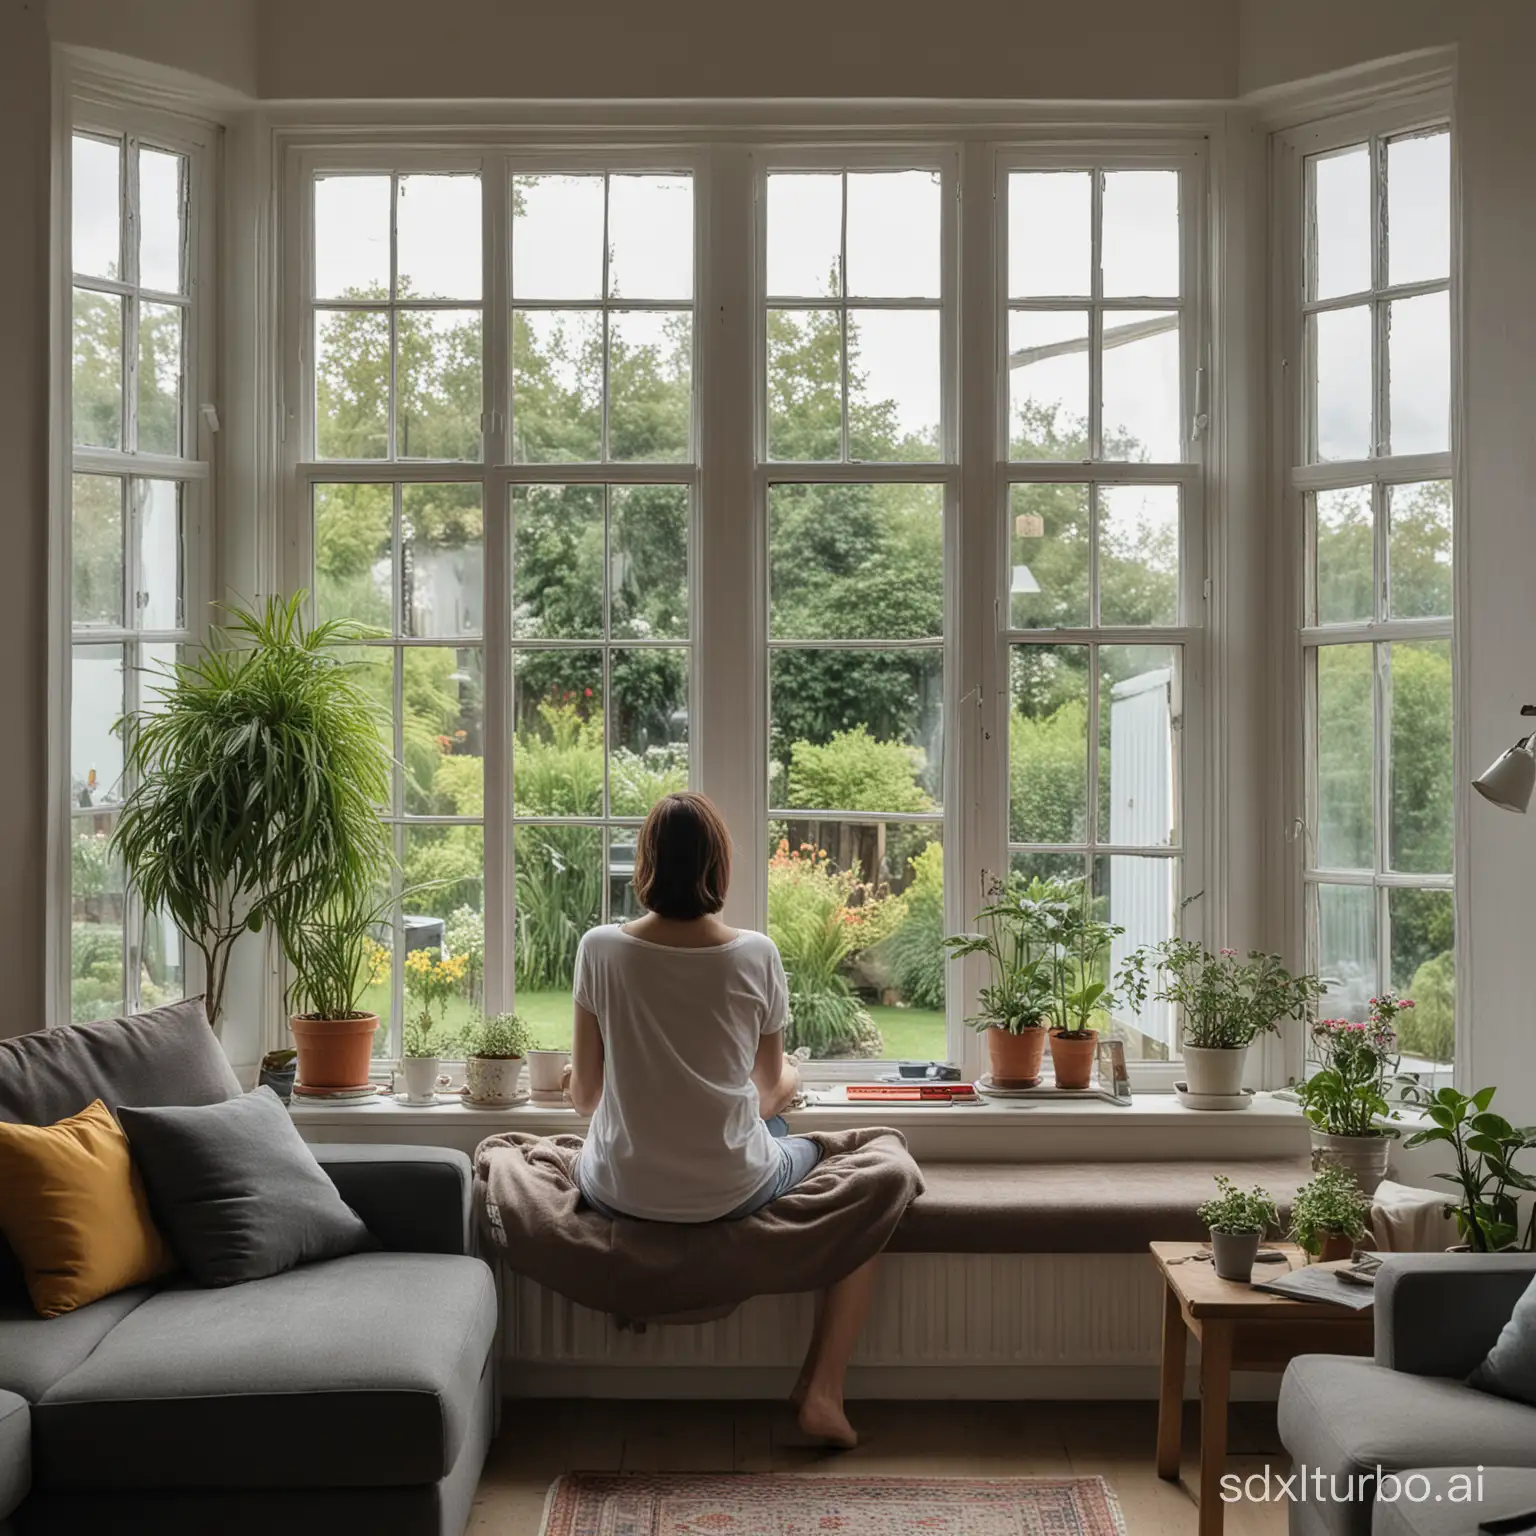 Woman-Contemplating-Nature-Through-Living-Room-Window